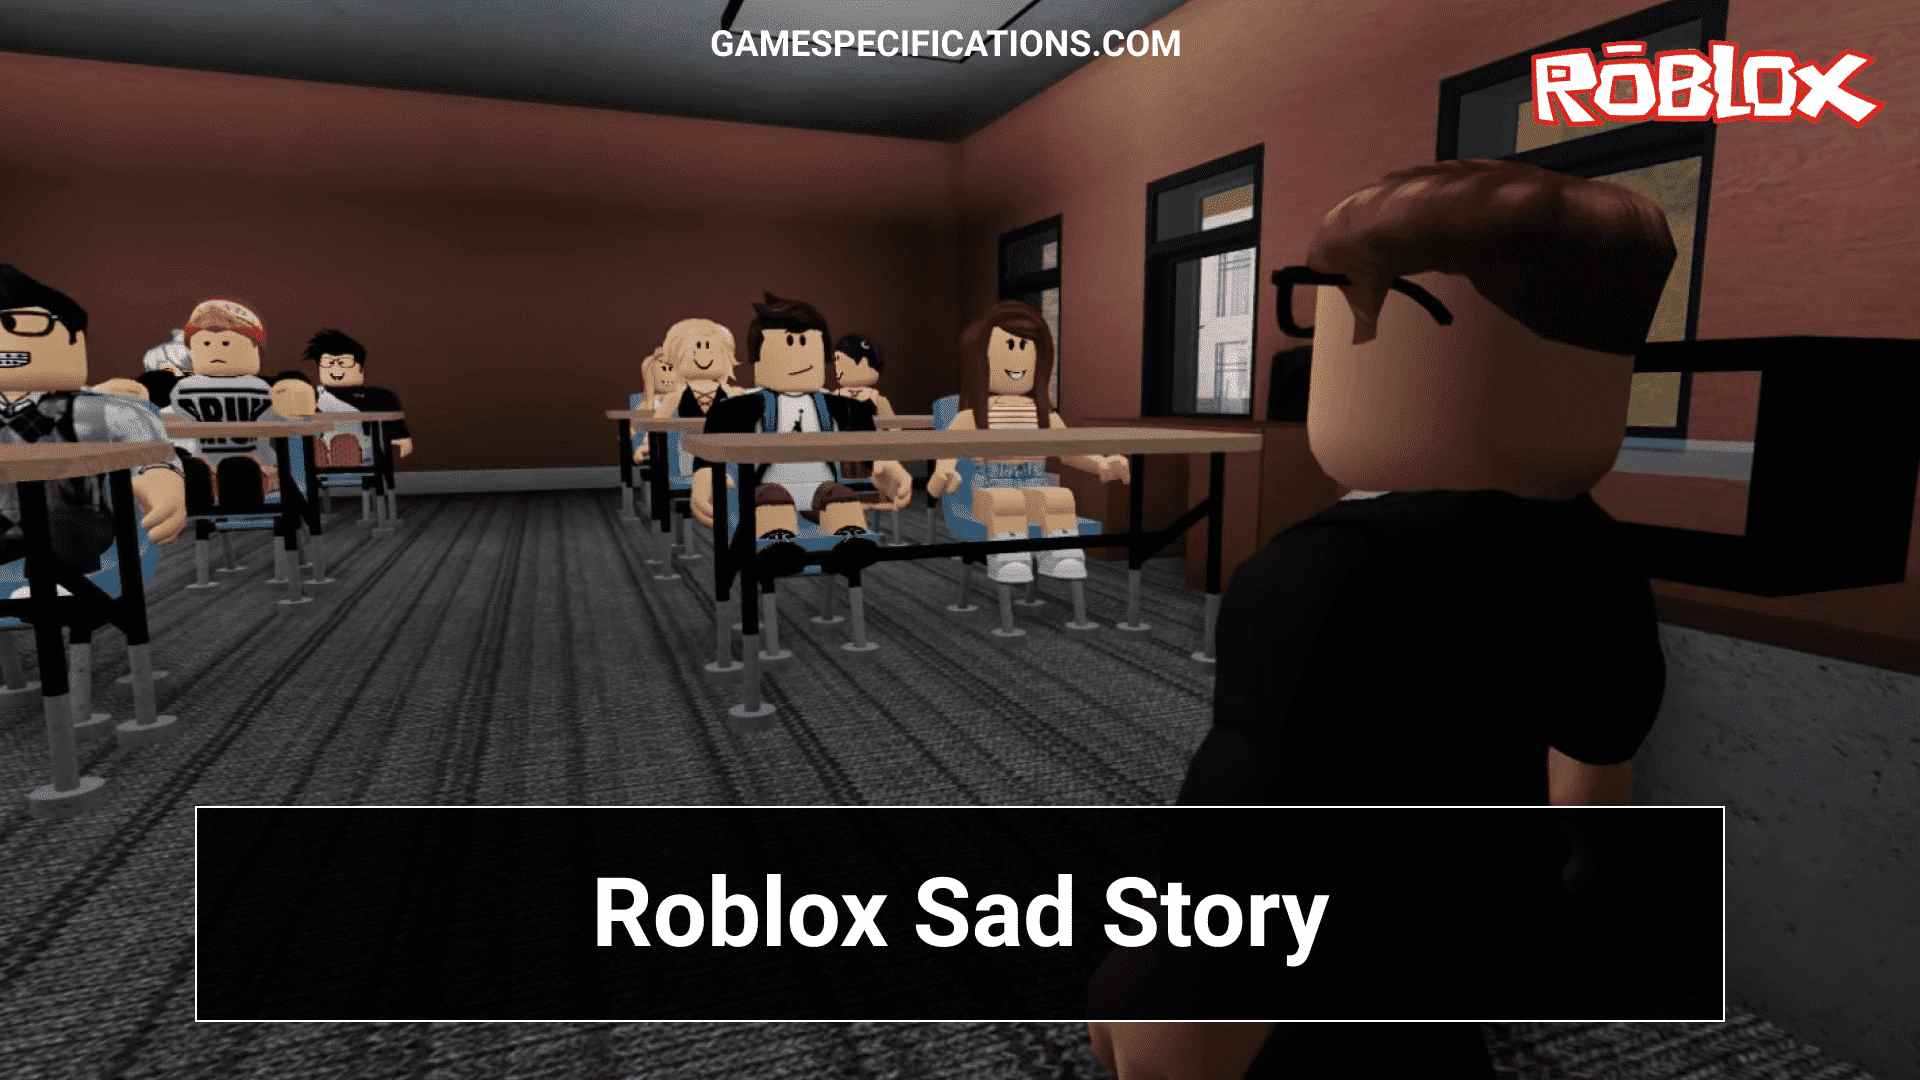 Roblox Sad Story Soldier Part 2 Archives Game Specifications - sad story roblox soldier part 2